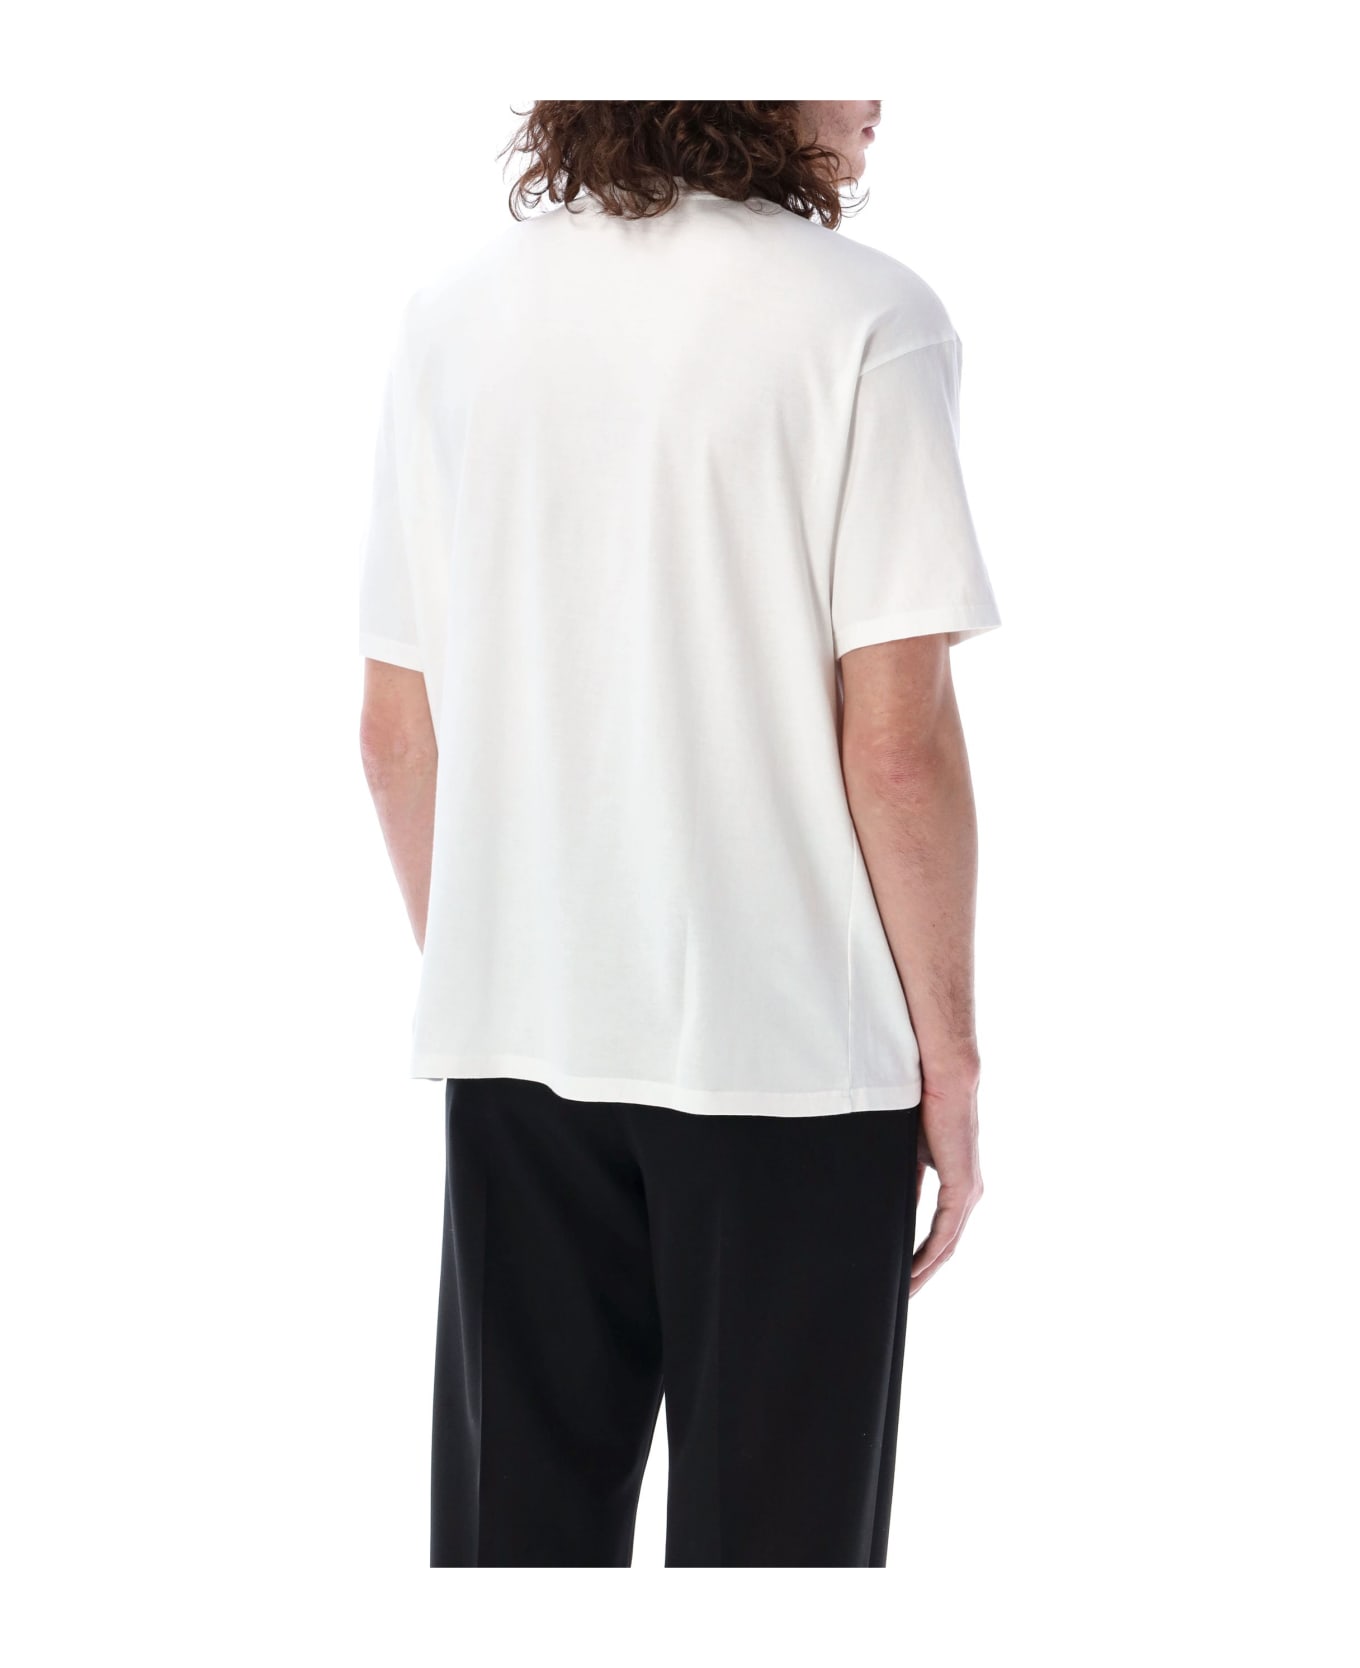 Undercover Jun Takahashi The End T-shirt - WHITE シャツ